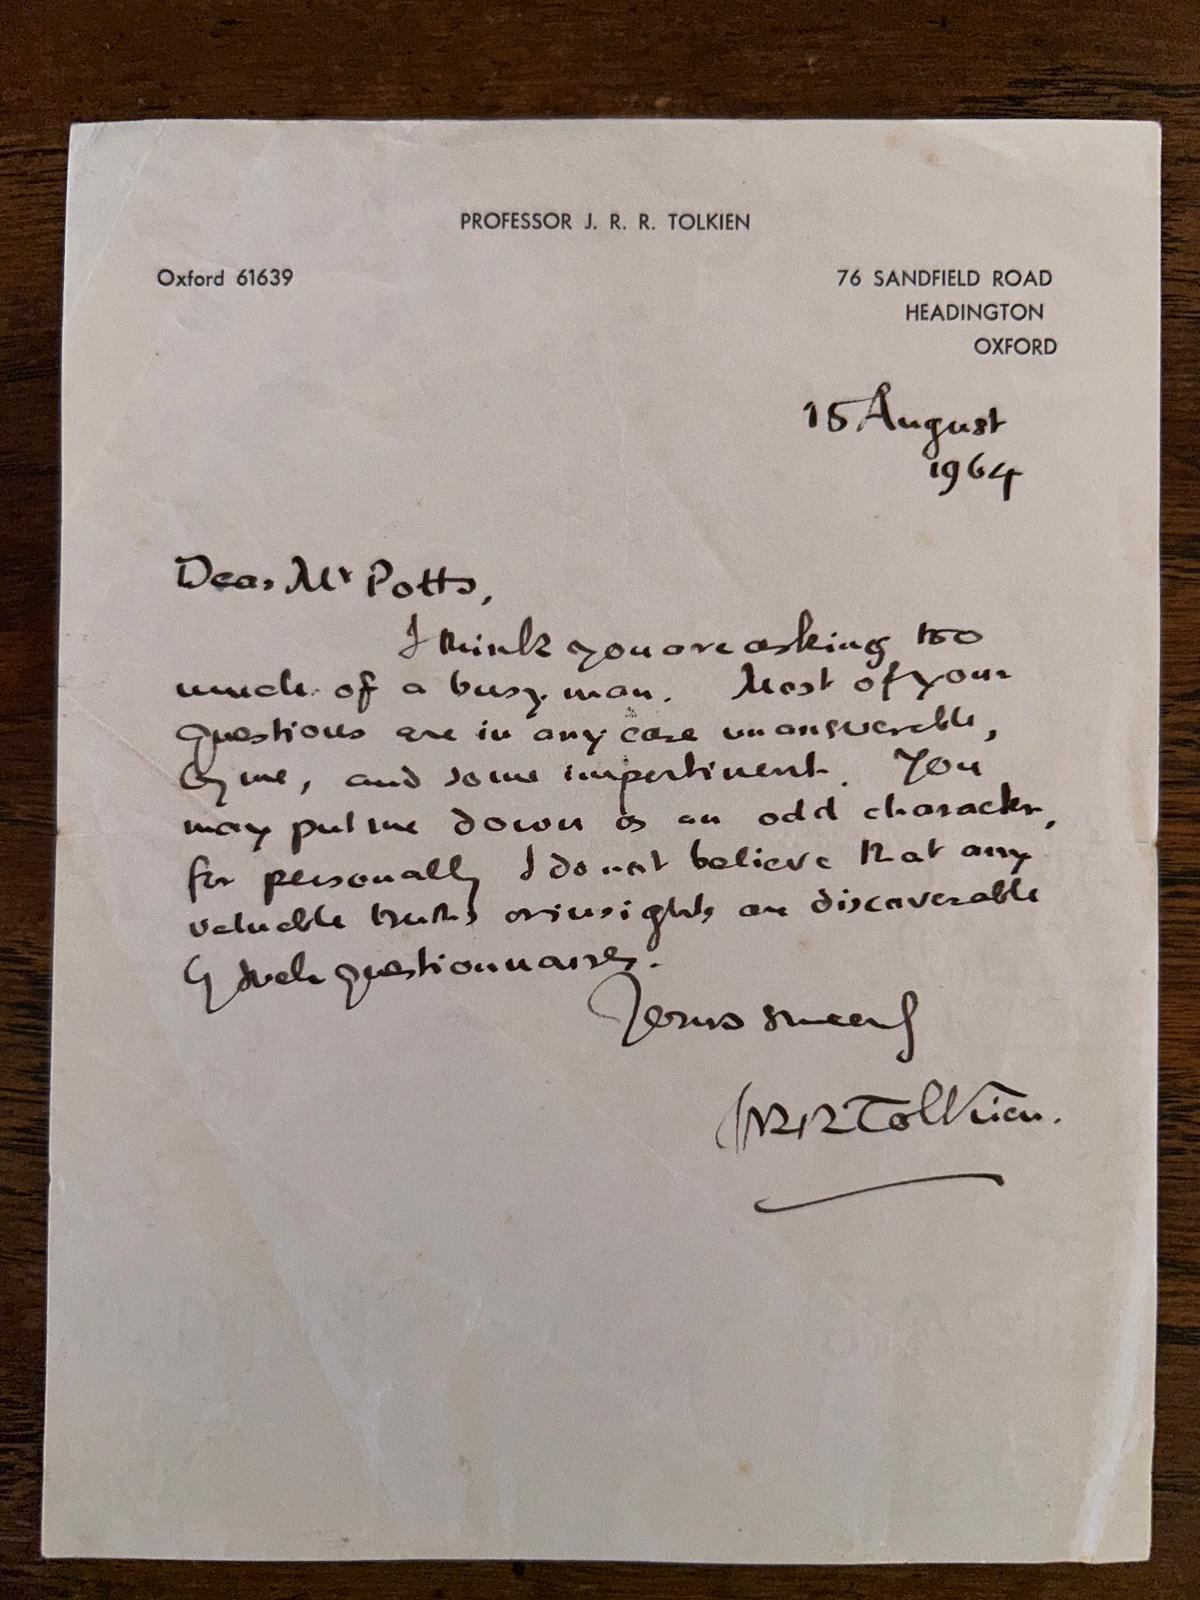 Autograph letter signed by J.R.R. Tolkien to Mr. Potts, 15 August 1964